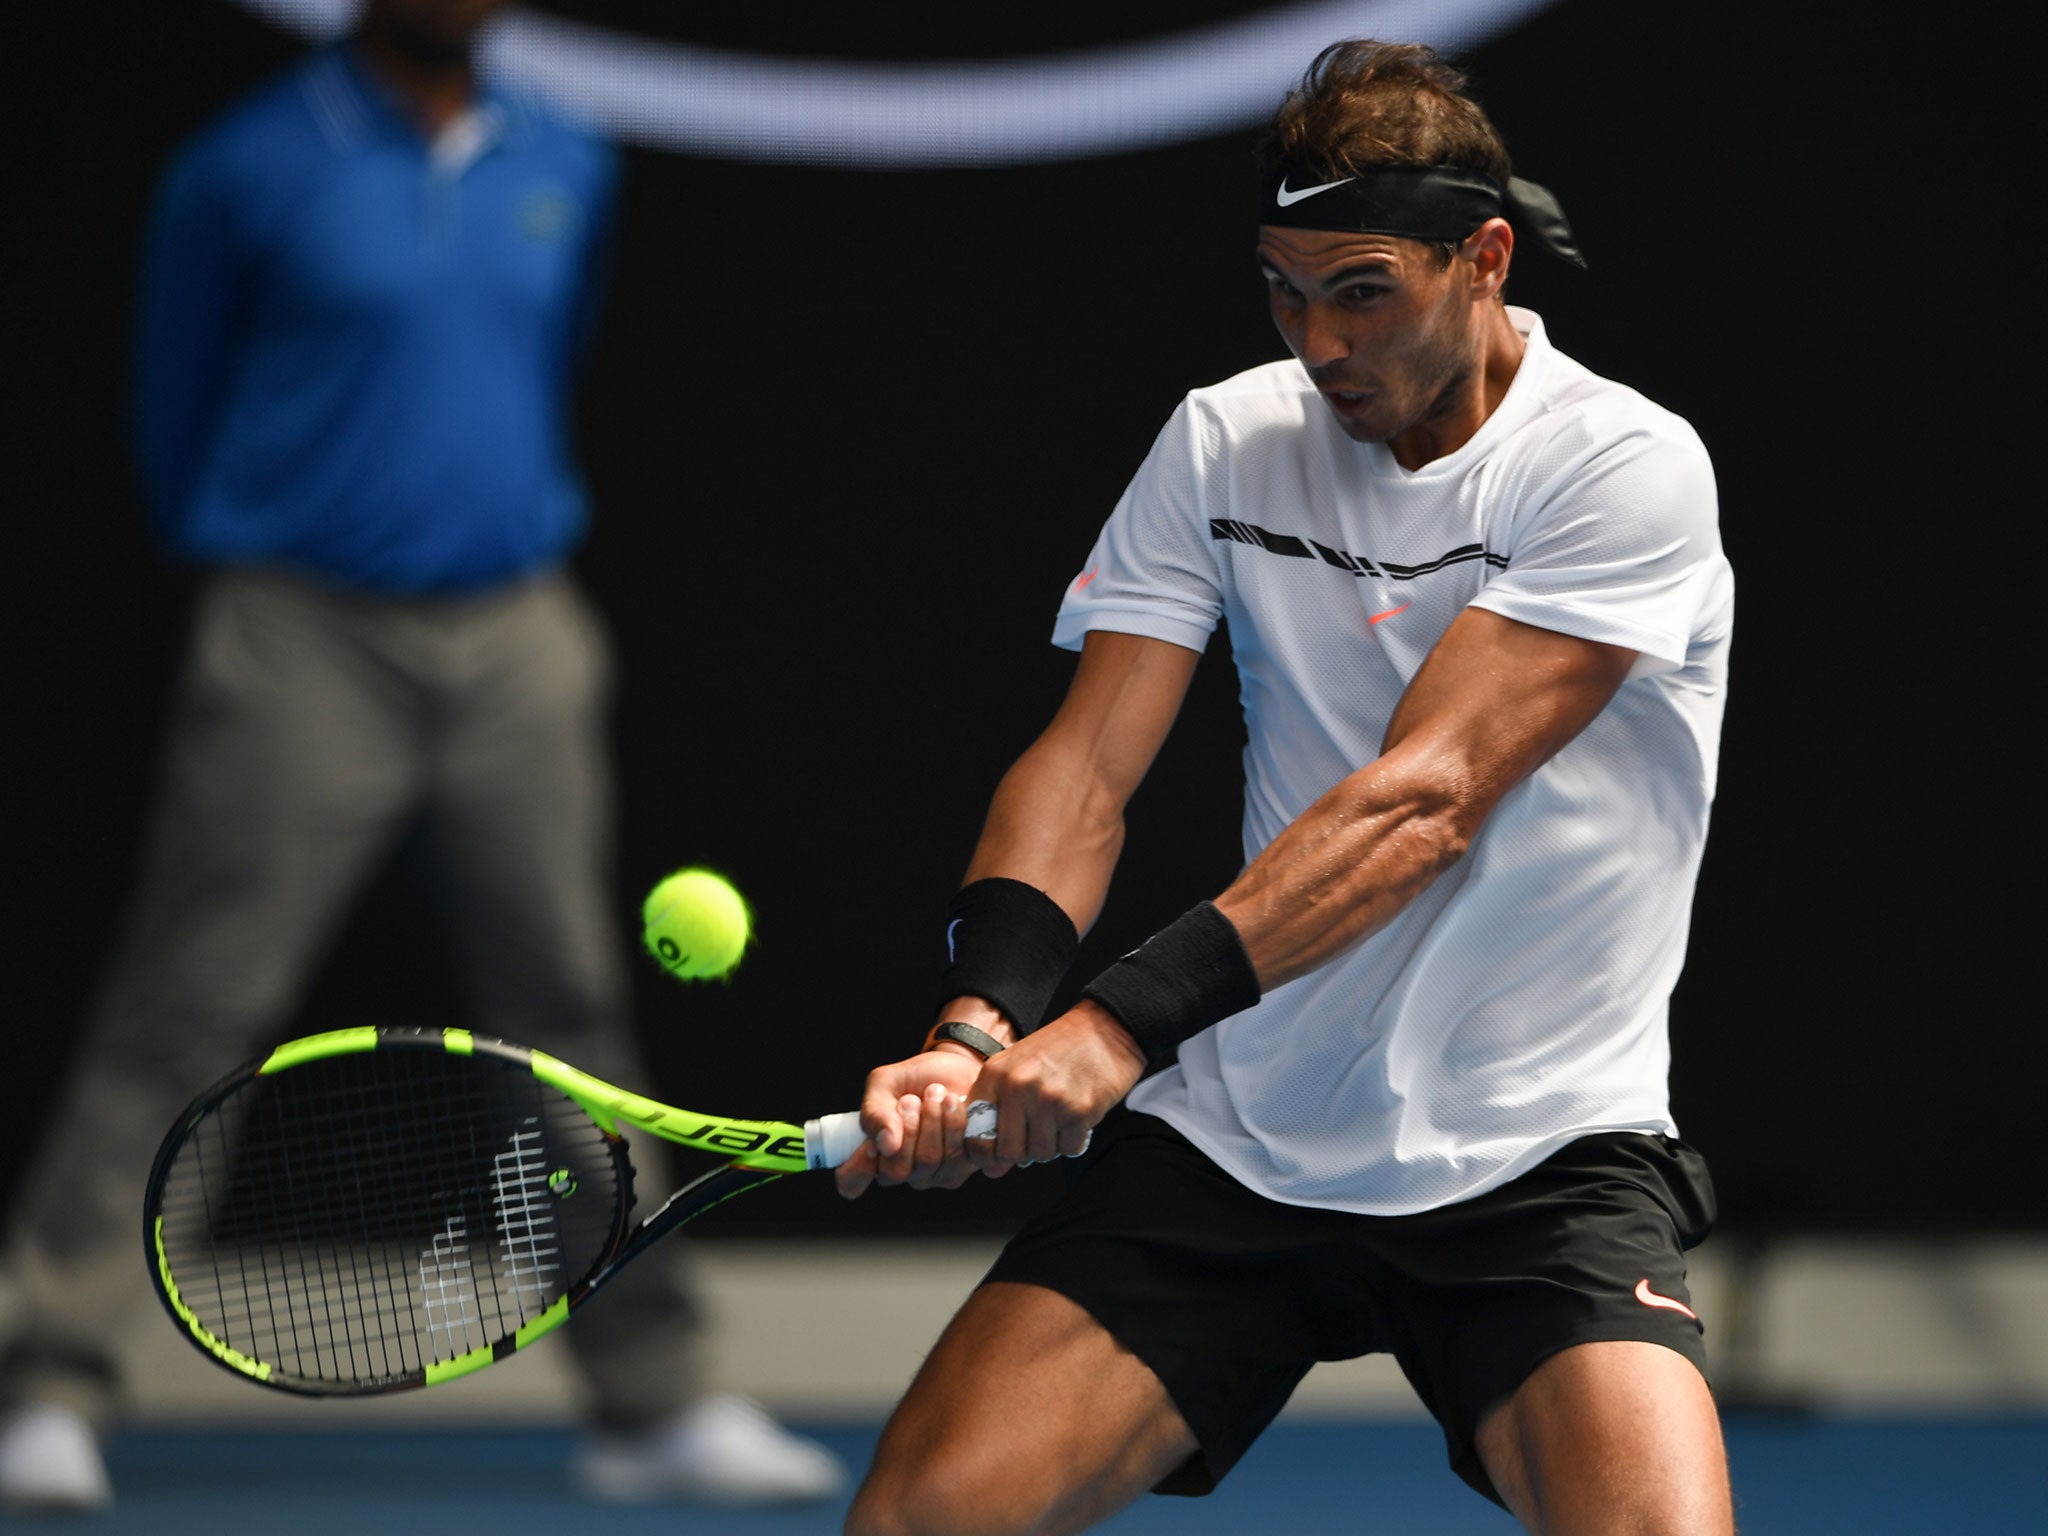 Nadal is mounting his latest return from injury after missing the end of the 2016 season